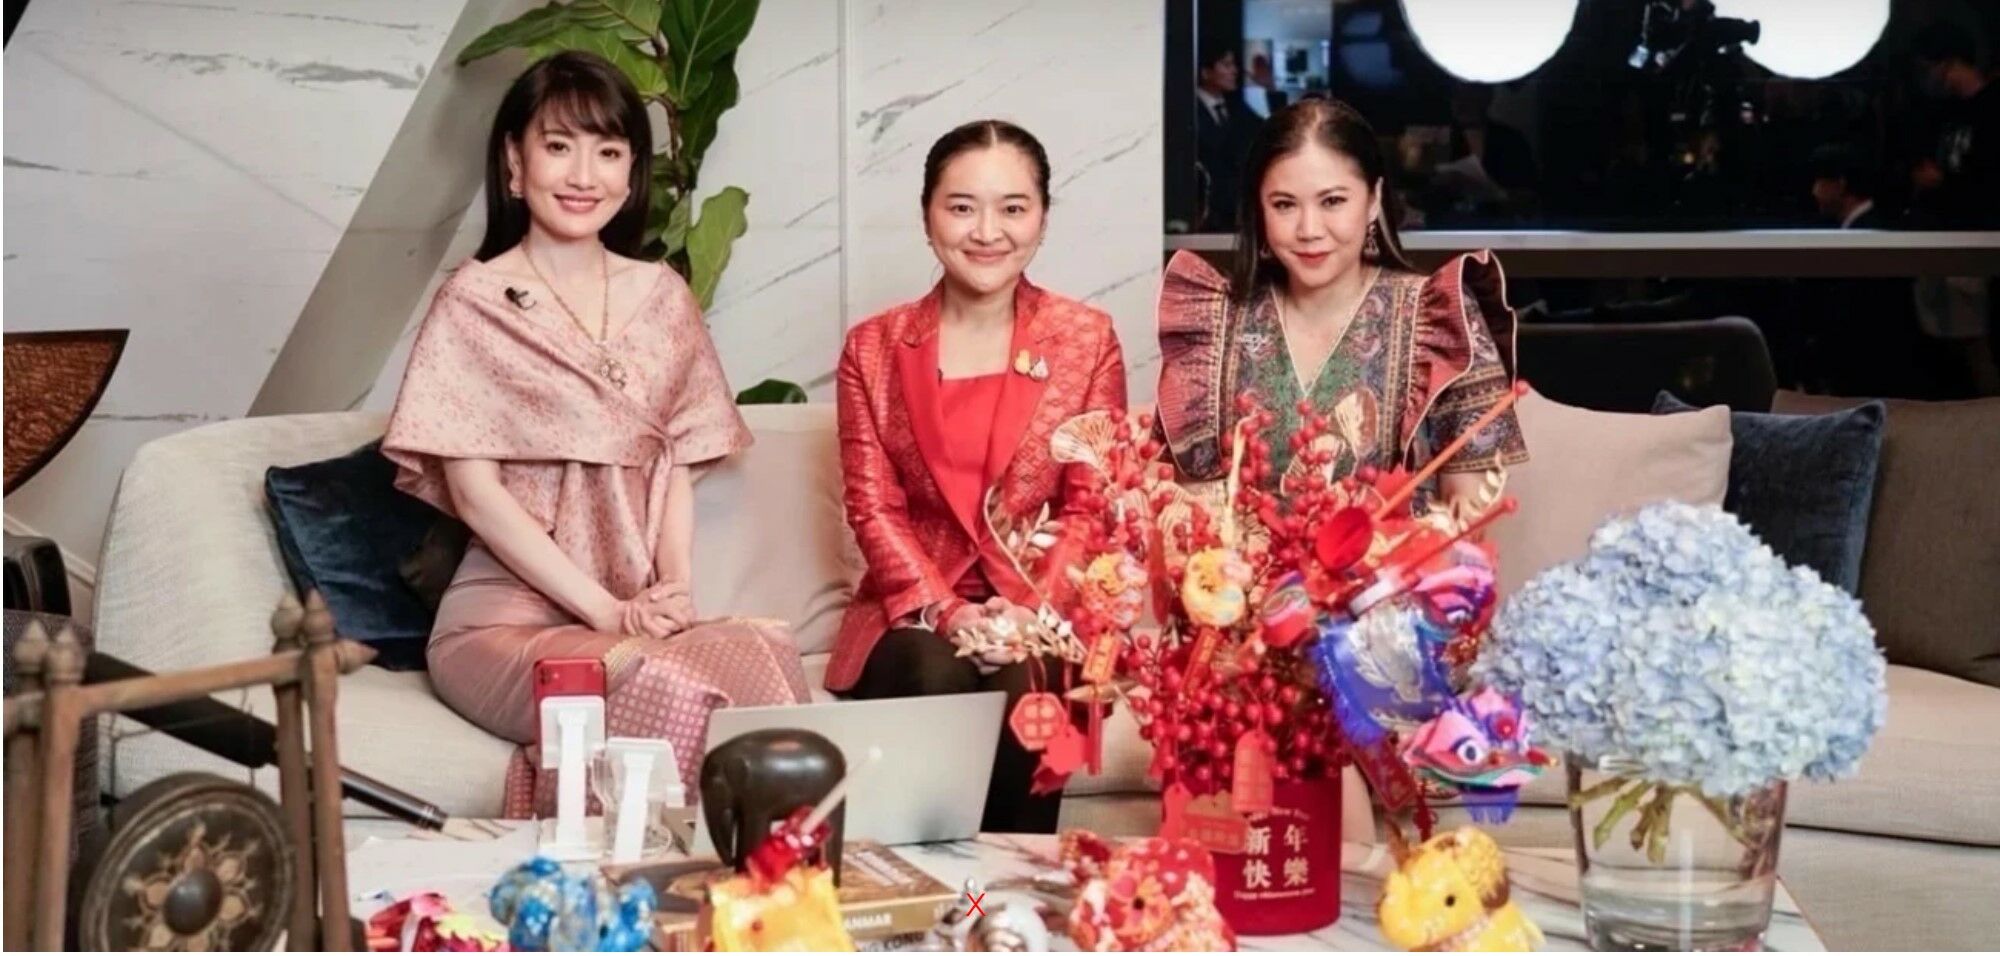 Thai tourism makes big sales on livestream event for Chinese visitors